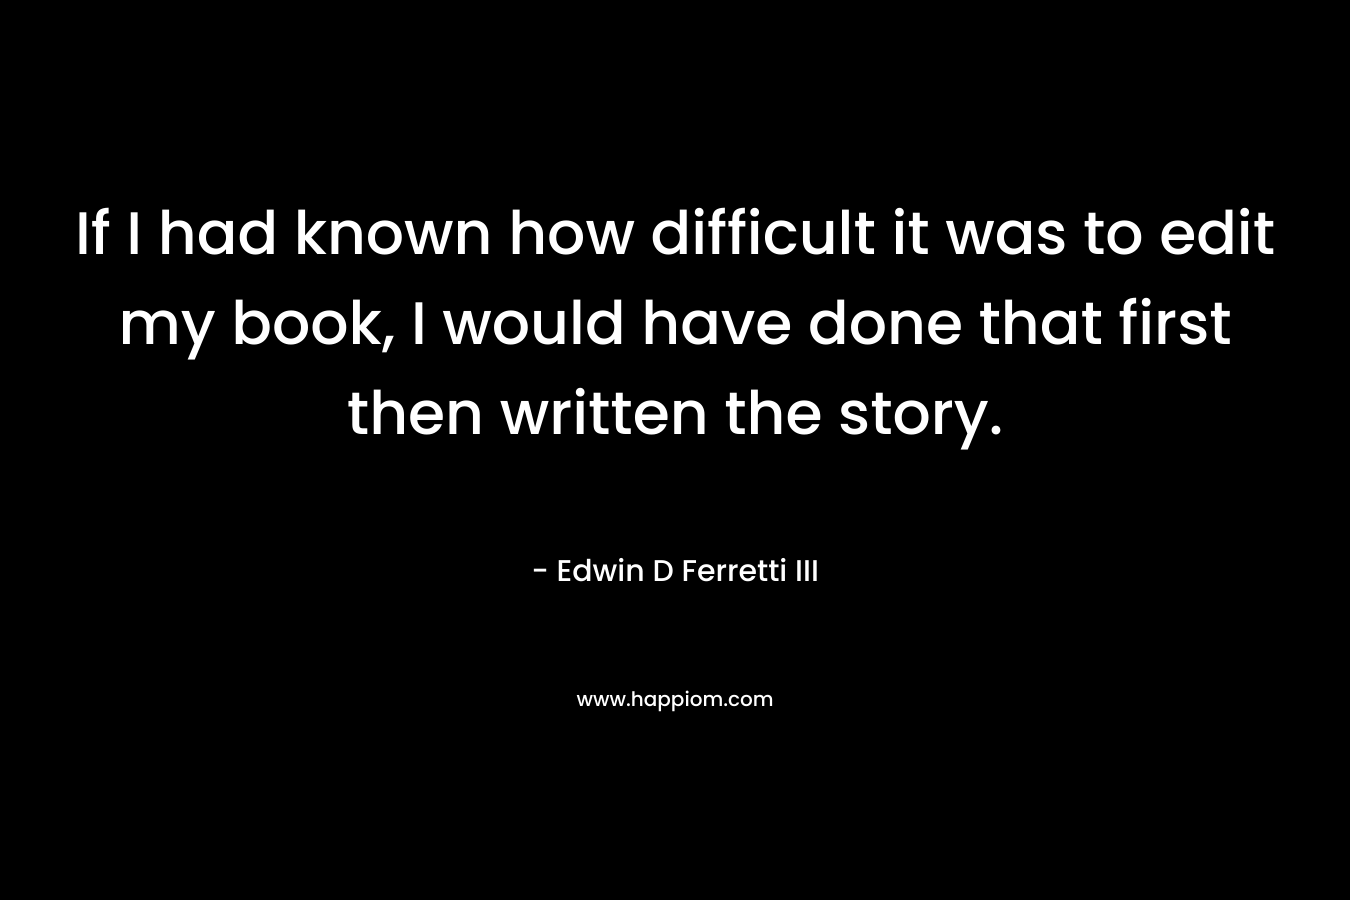 If I had known how difficult it was to edit my book, I would have done that first then written the story. – Edwin D Ferretti III